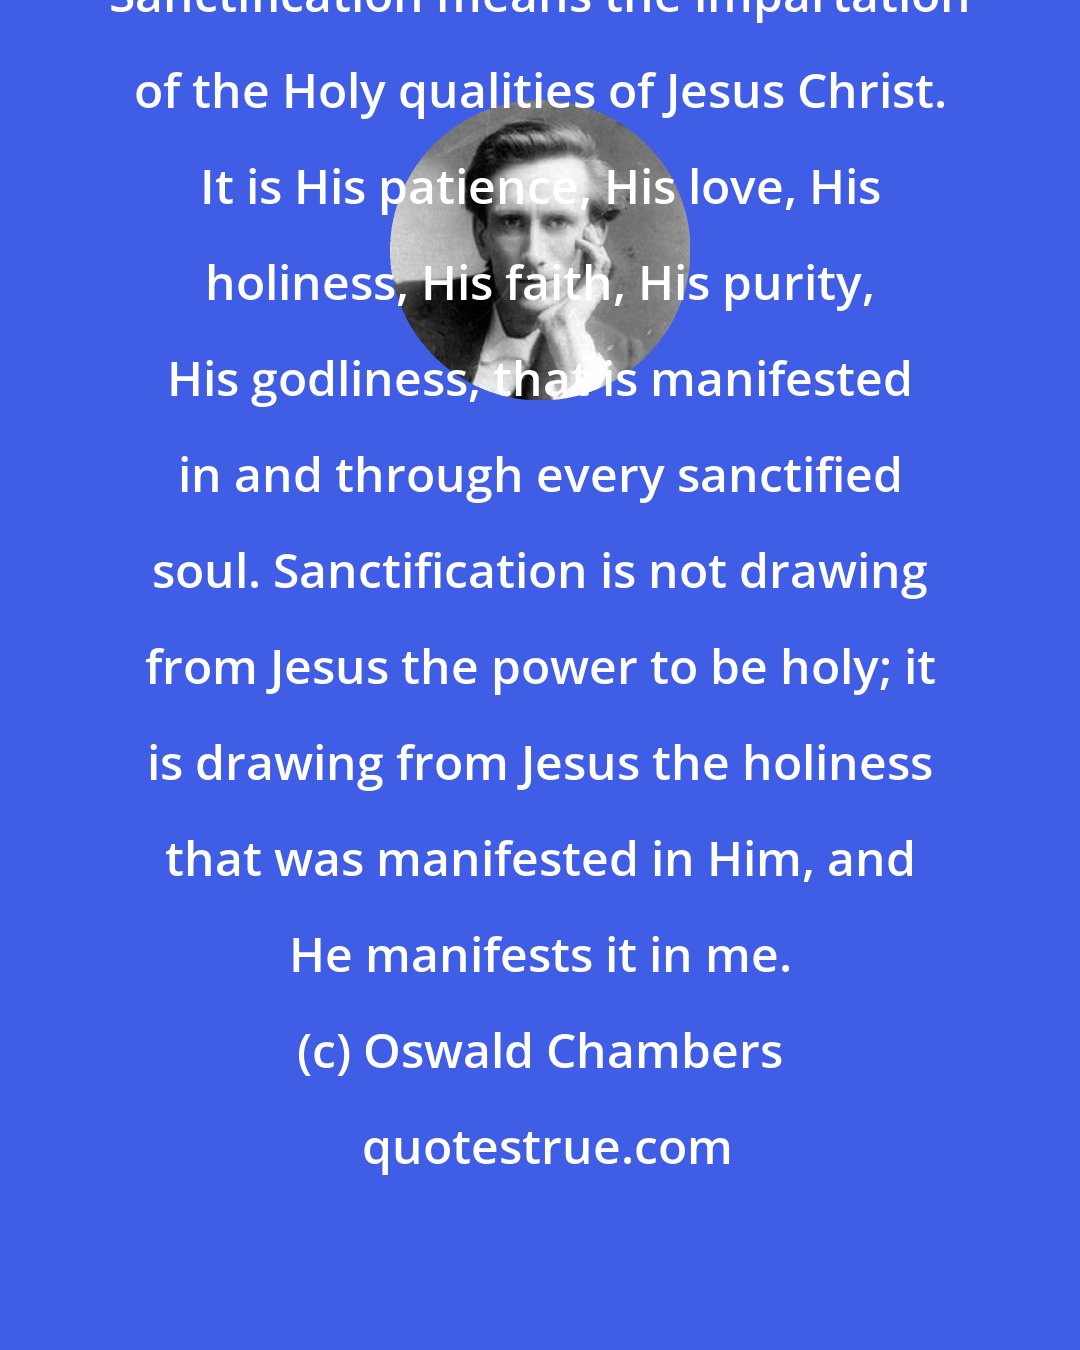 Oswald Chambers: Sanctification means the impartation of the Holy qualities of Jesus Christ. It is His patience, His love, His holiness, His faith, His purity, His godliness, that is manifested in and through every sanctified soul. Sanctification is not drawing from Jesus the power to be holy; it is drawing from Jesus the holiness that was manifested in Him, and He manifests it in me.